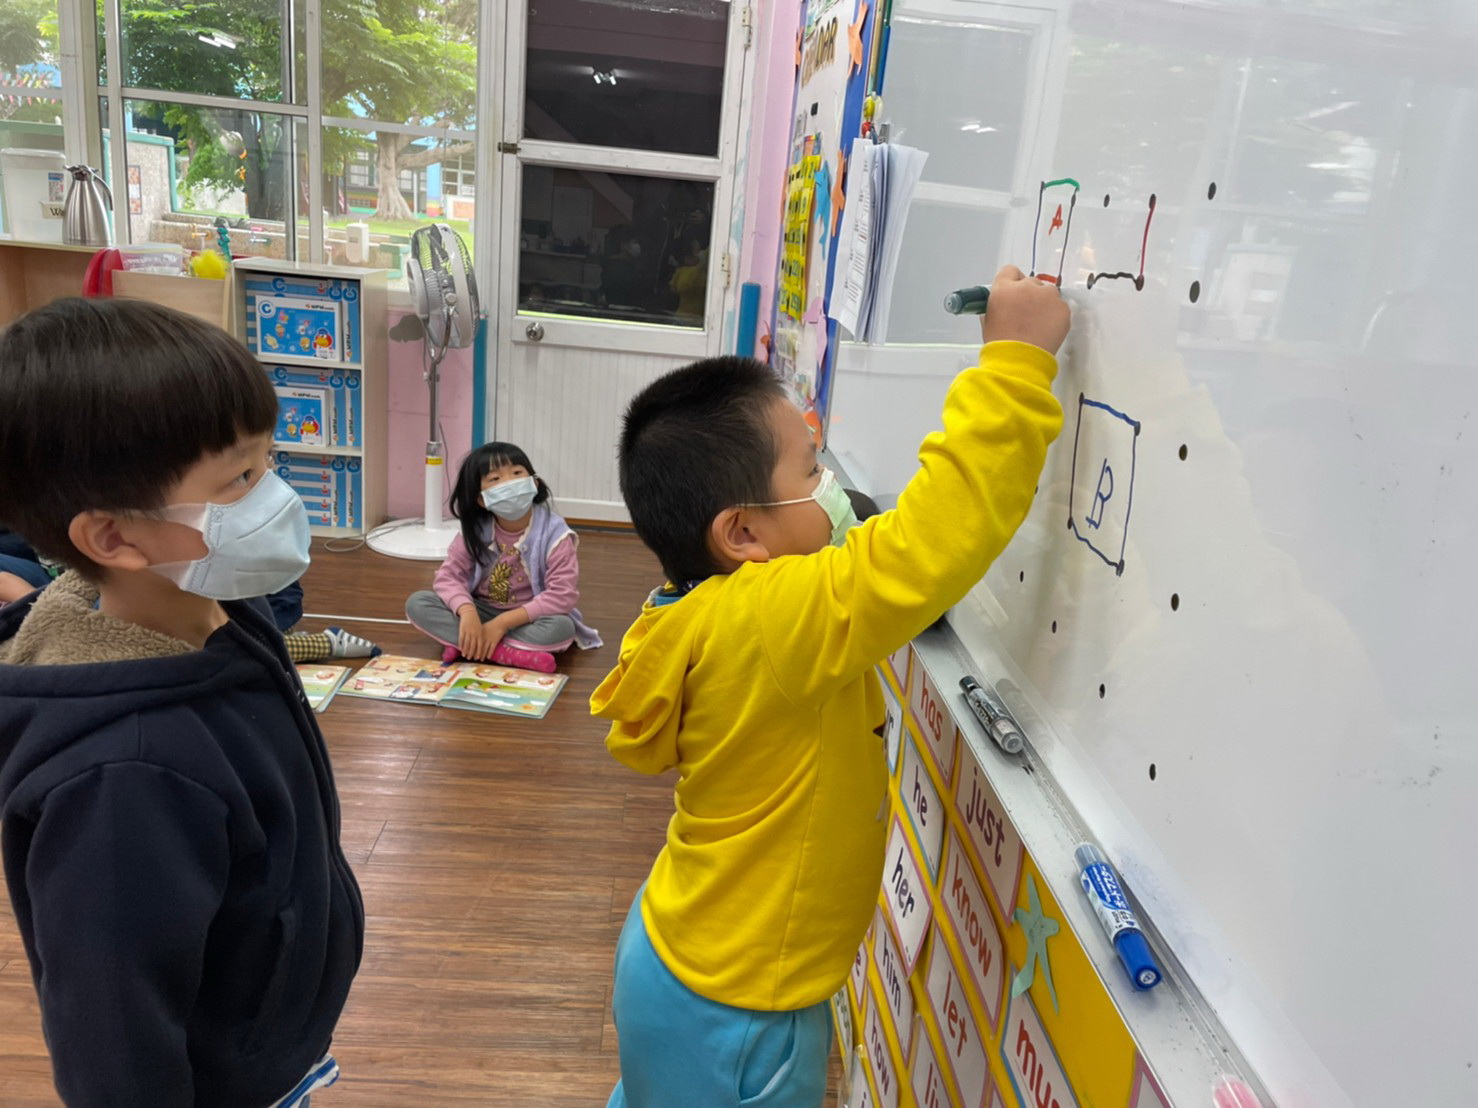 Teaching English and Living in Taiwan Jobs Available 教學工作, Frobel UK, SA, NZ, AU, USA and CA Accents WELCOME!  Up to 28 Hrs / Week!  Performance Bonuses! Great Environment! Help Finding Housing! First-Time Teacher Welcome! image